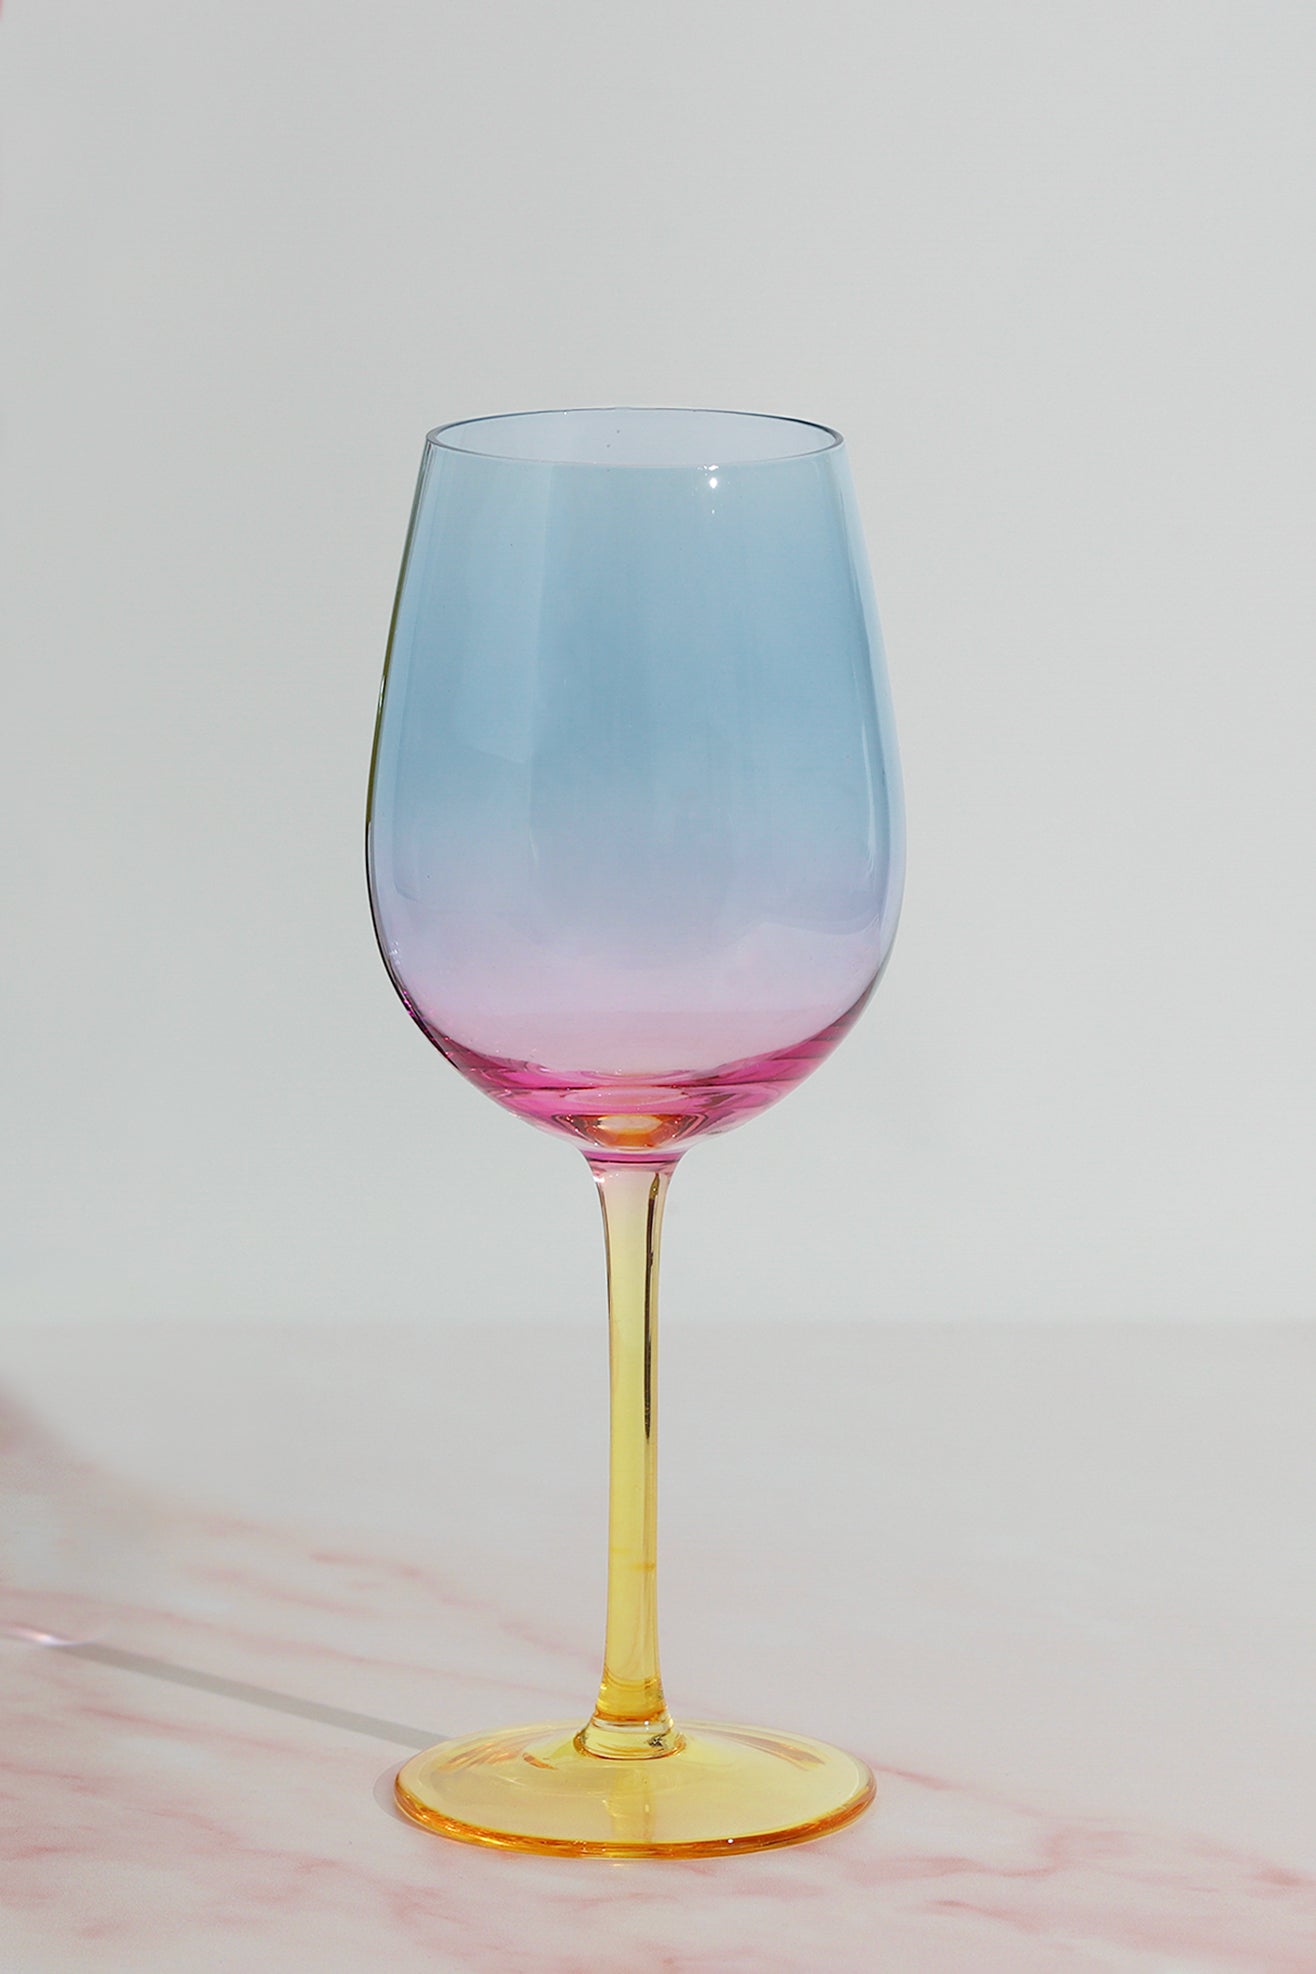 Set of 4 Wine Glasses with a Rainbow Hue